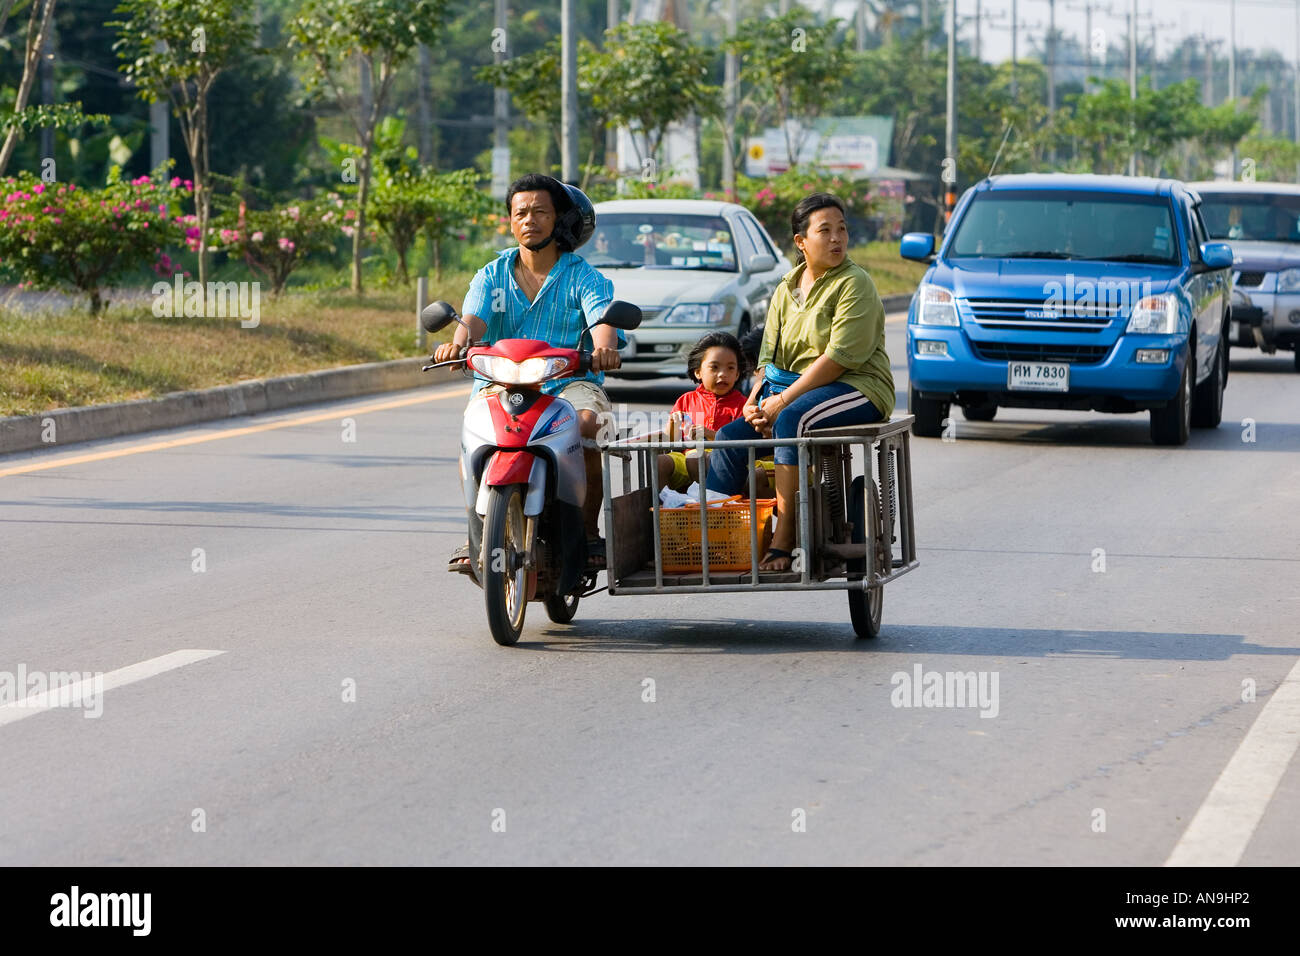 Family travel on a motorcycle and in a side trailer Bangkok Thailand Stock Photo